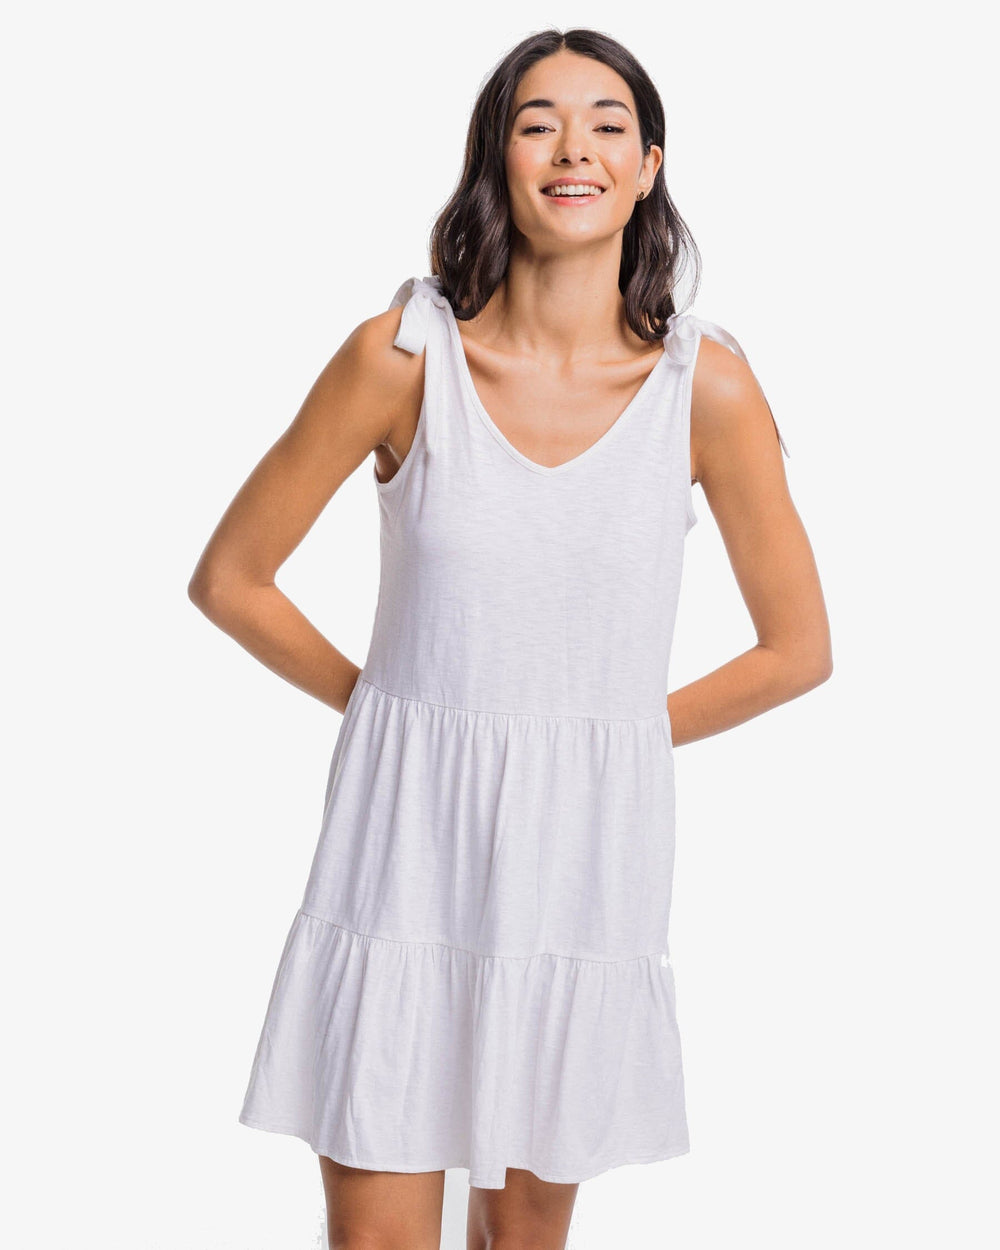 The front view of the Southern Tide Nicole Sun Farer Tiered Tank Dress by Southern Tide - Classic White